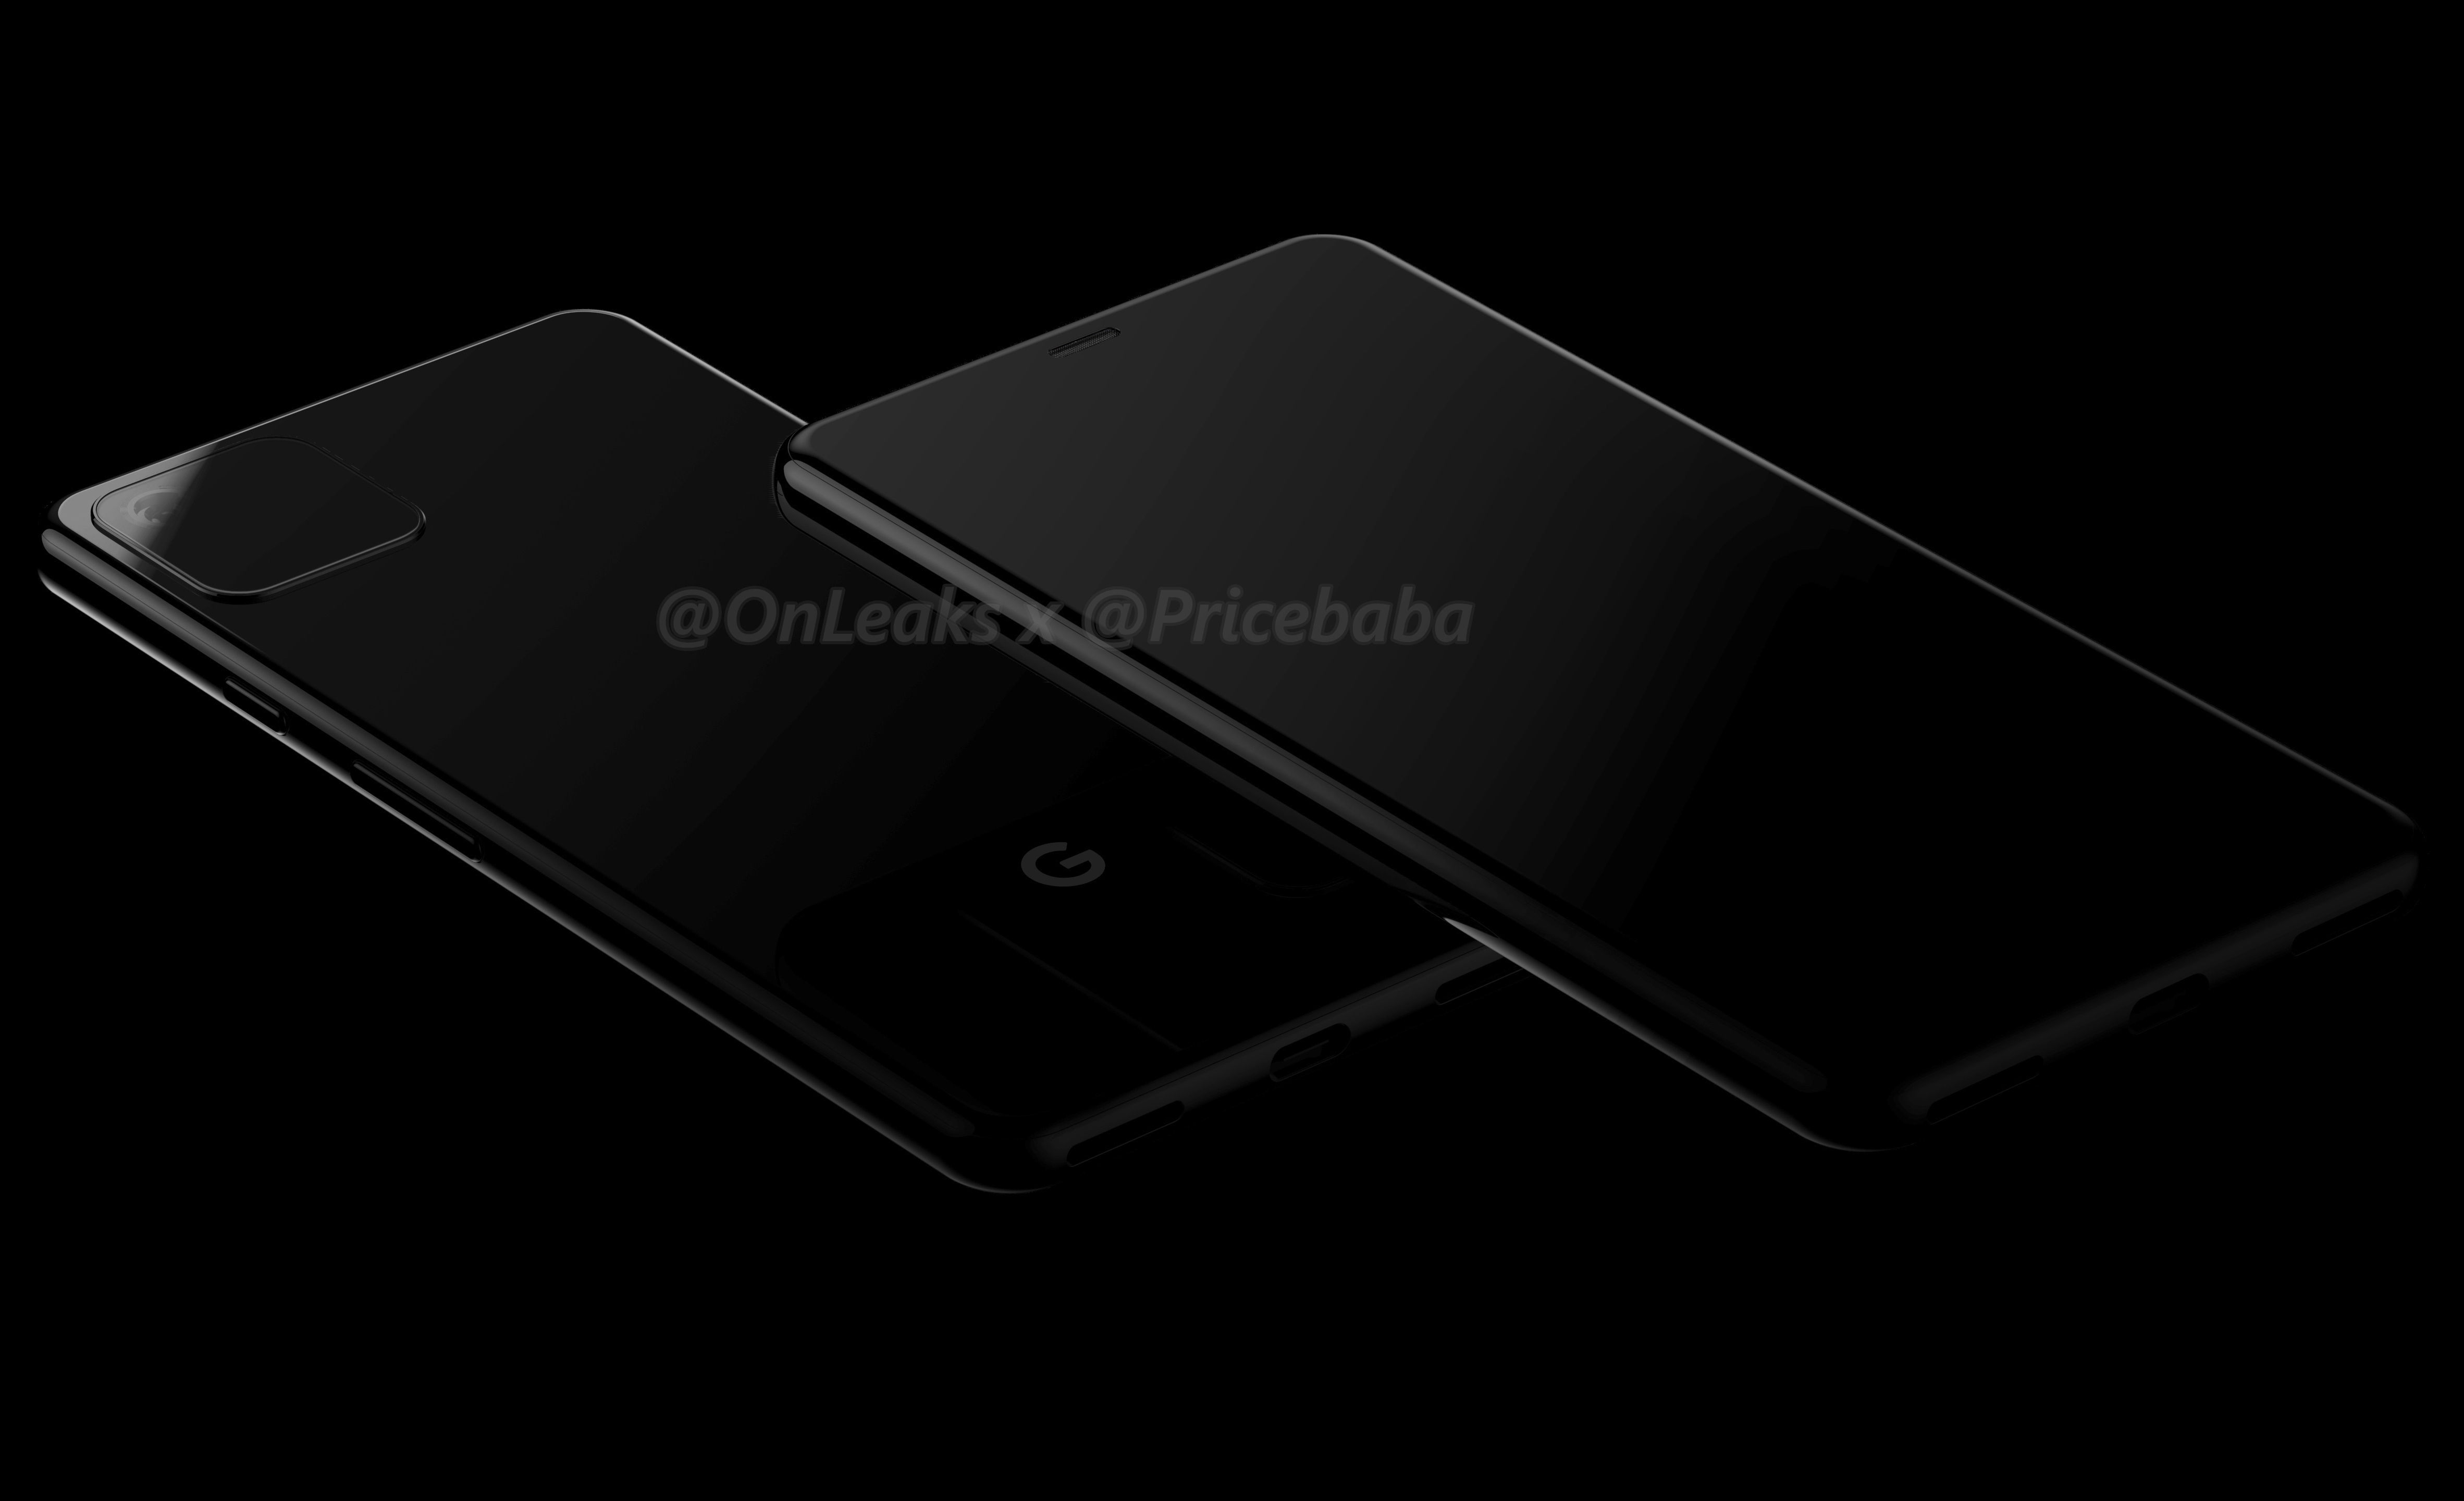 Pixel 4 leaked renders make rounds on the web